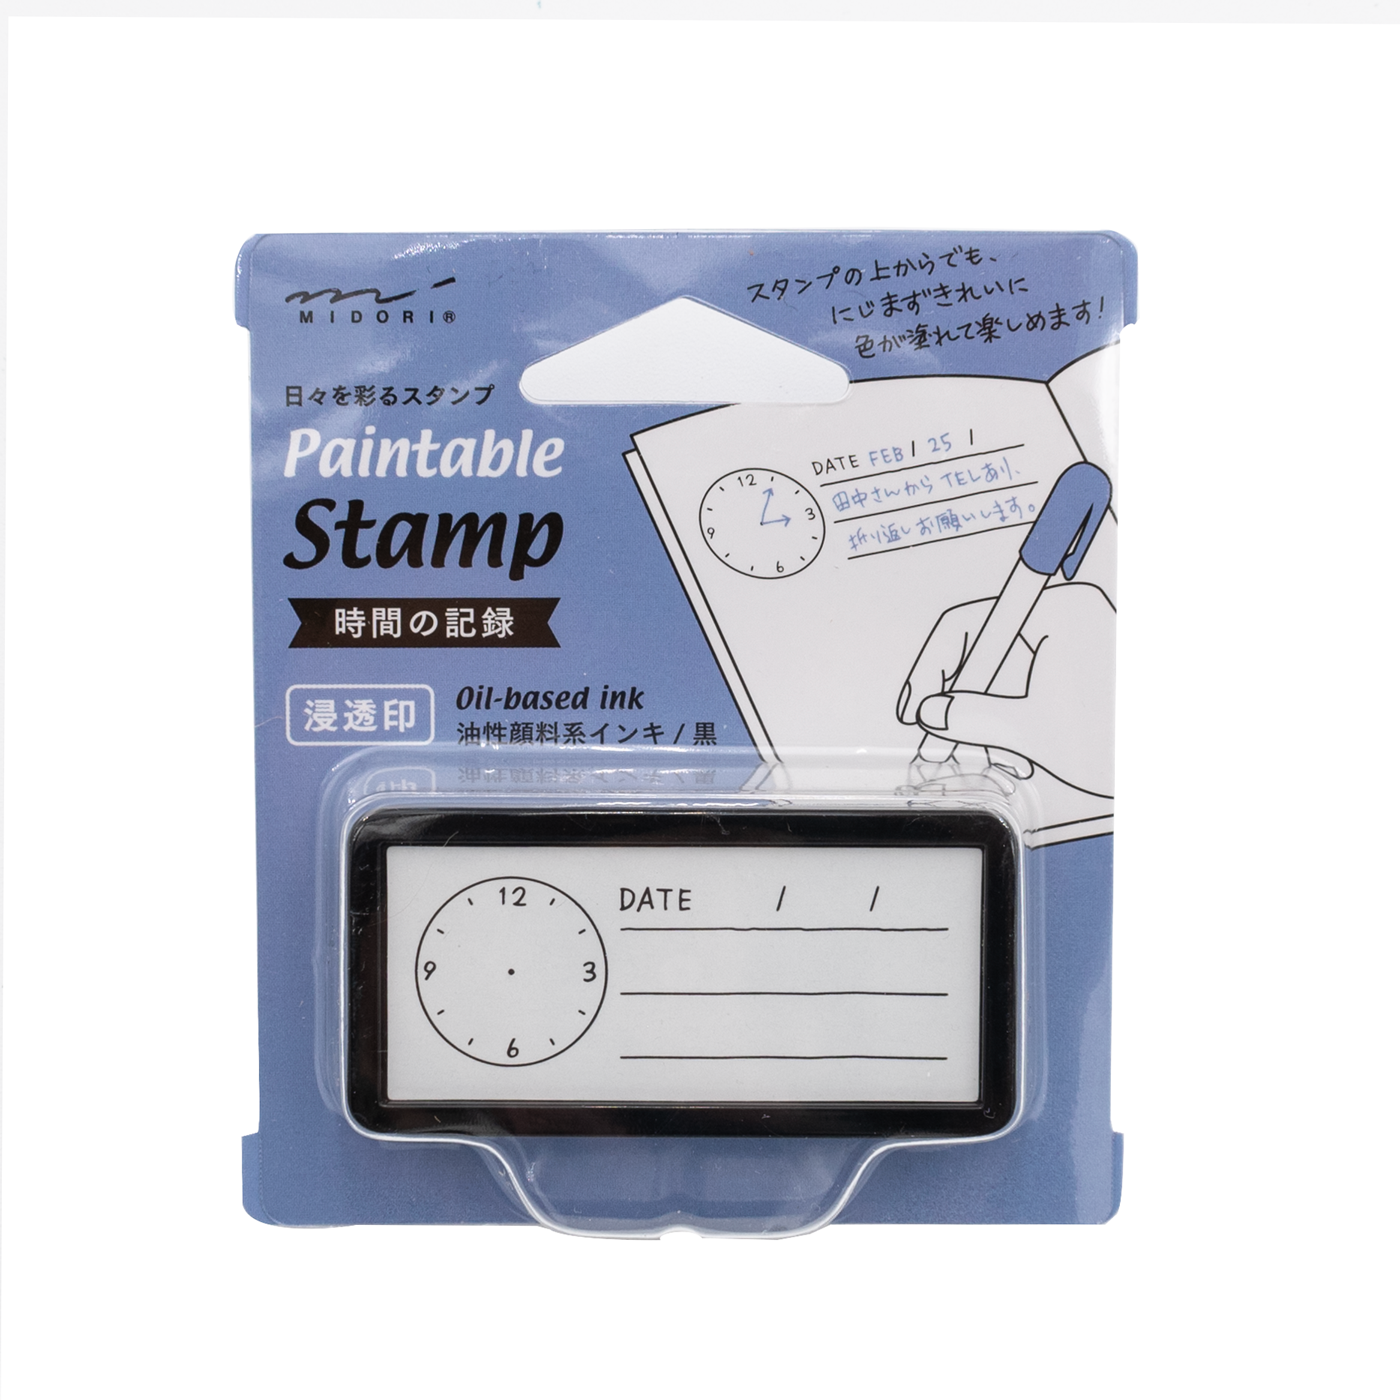 Midori Paintable Stamp - Pre Inked - Keep Track of Time